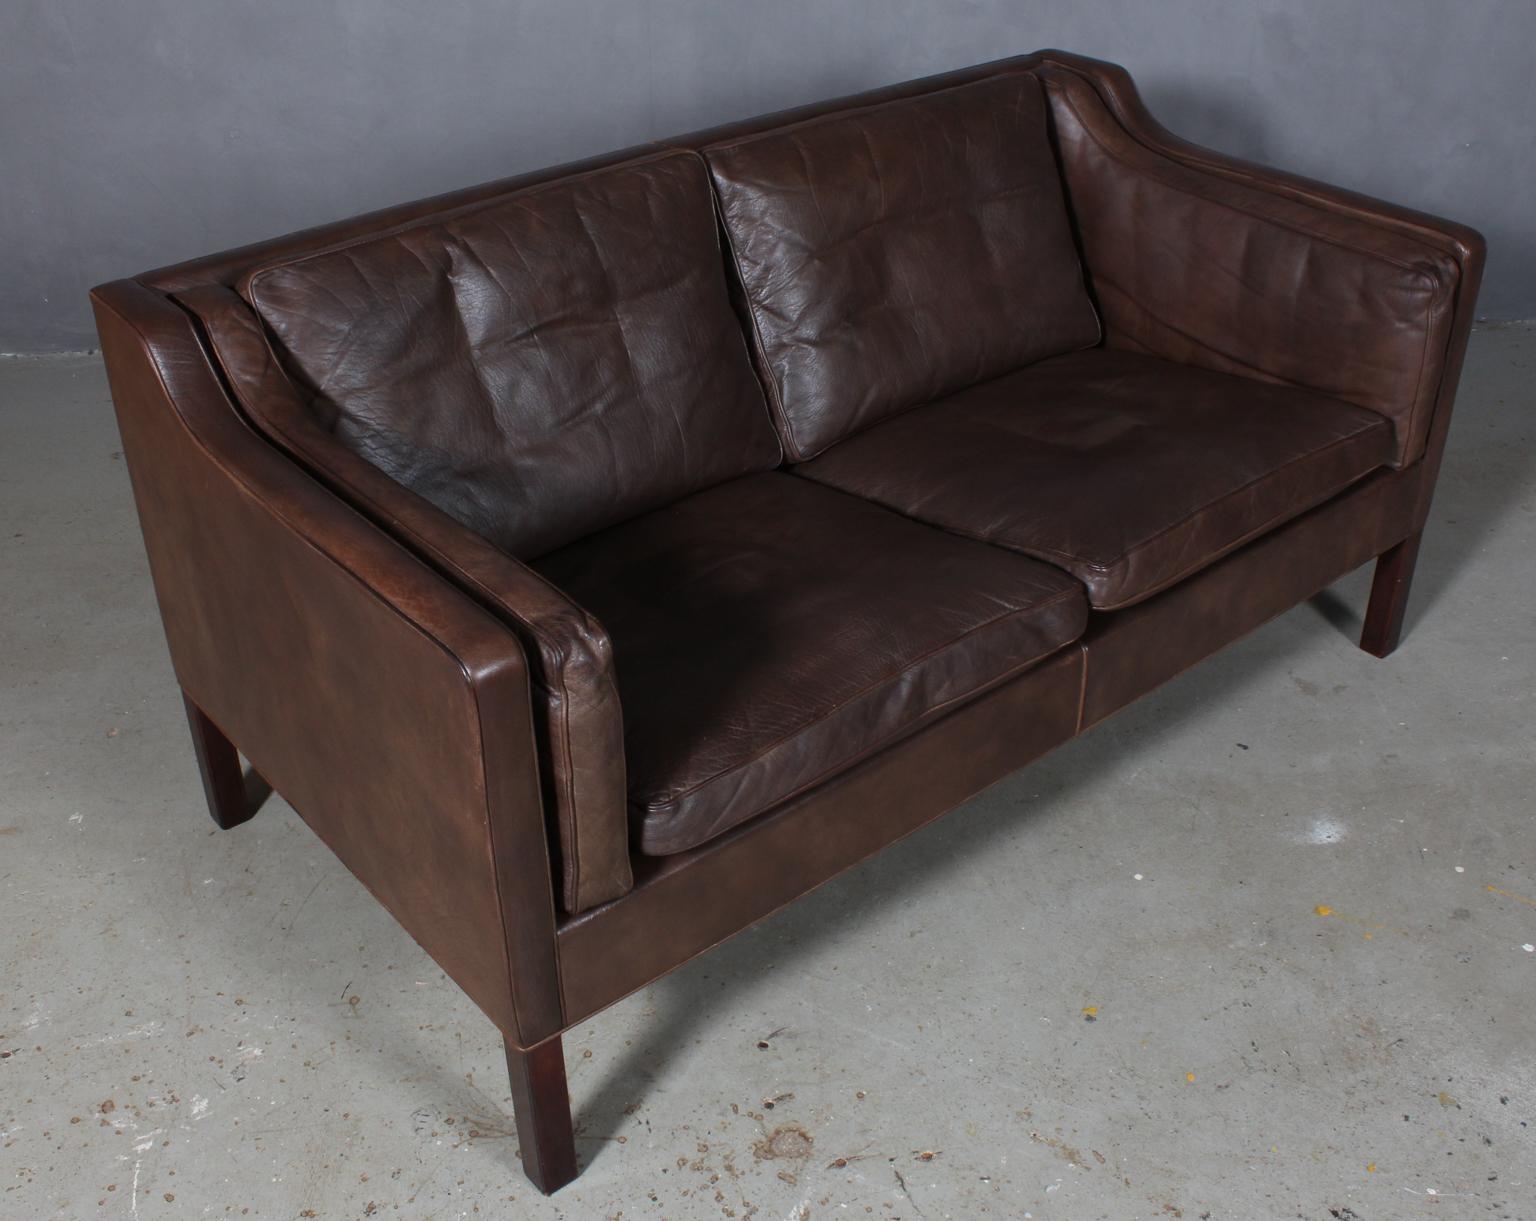 Børge Mogensen two-seat sofa with original brown leather upholstery.

Legs of stained oak.

Model 2212, made by Fredericia Furniture.